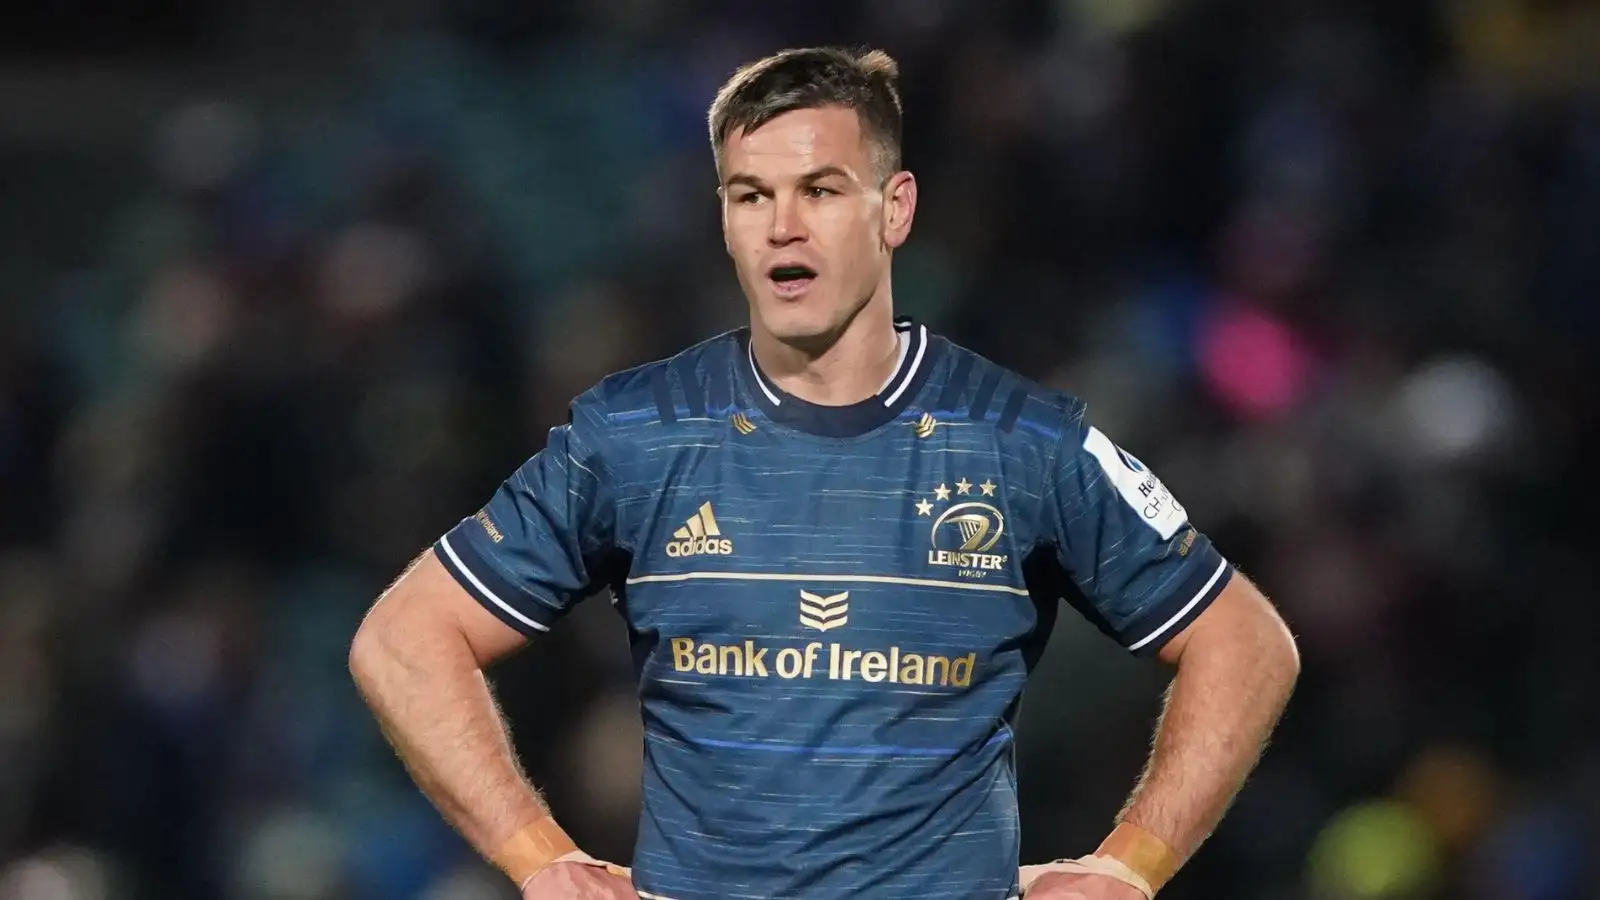 URC: Jonathan Sexton returns to lead Leinster against Connacht, Ireland wings back for Ulster while Liam Williams starts at 15 for Cardiff